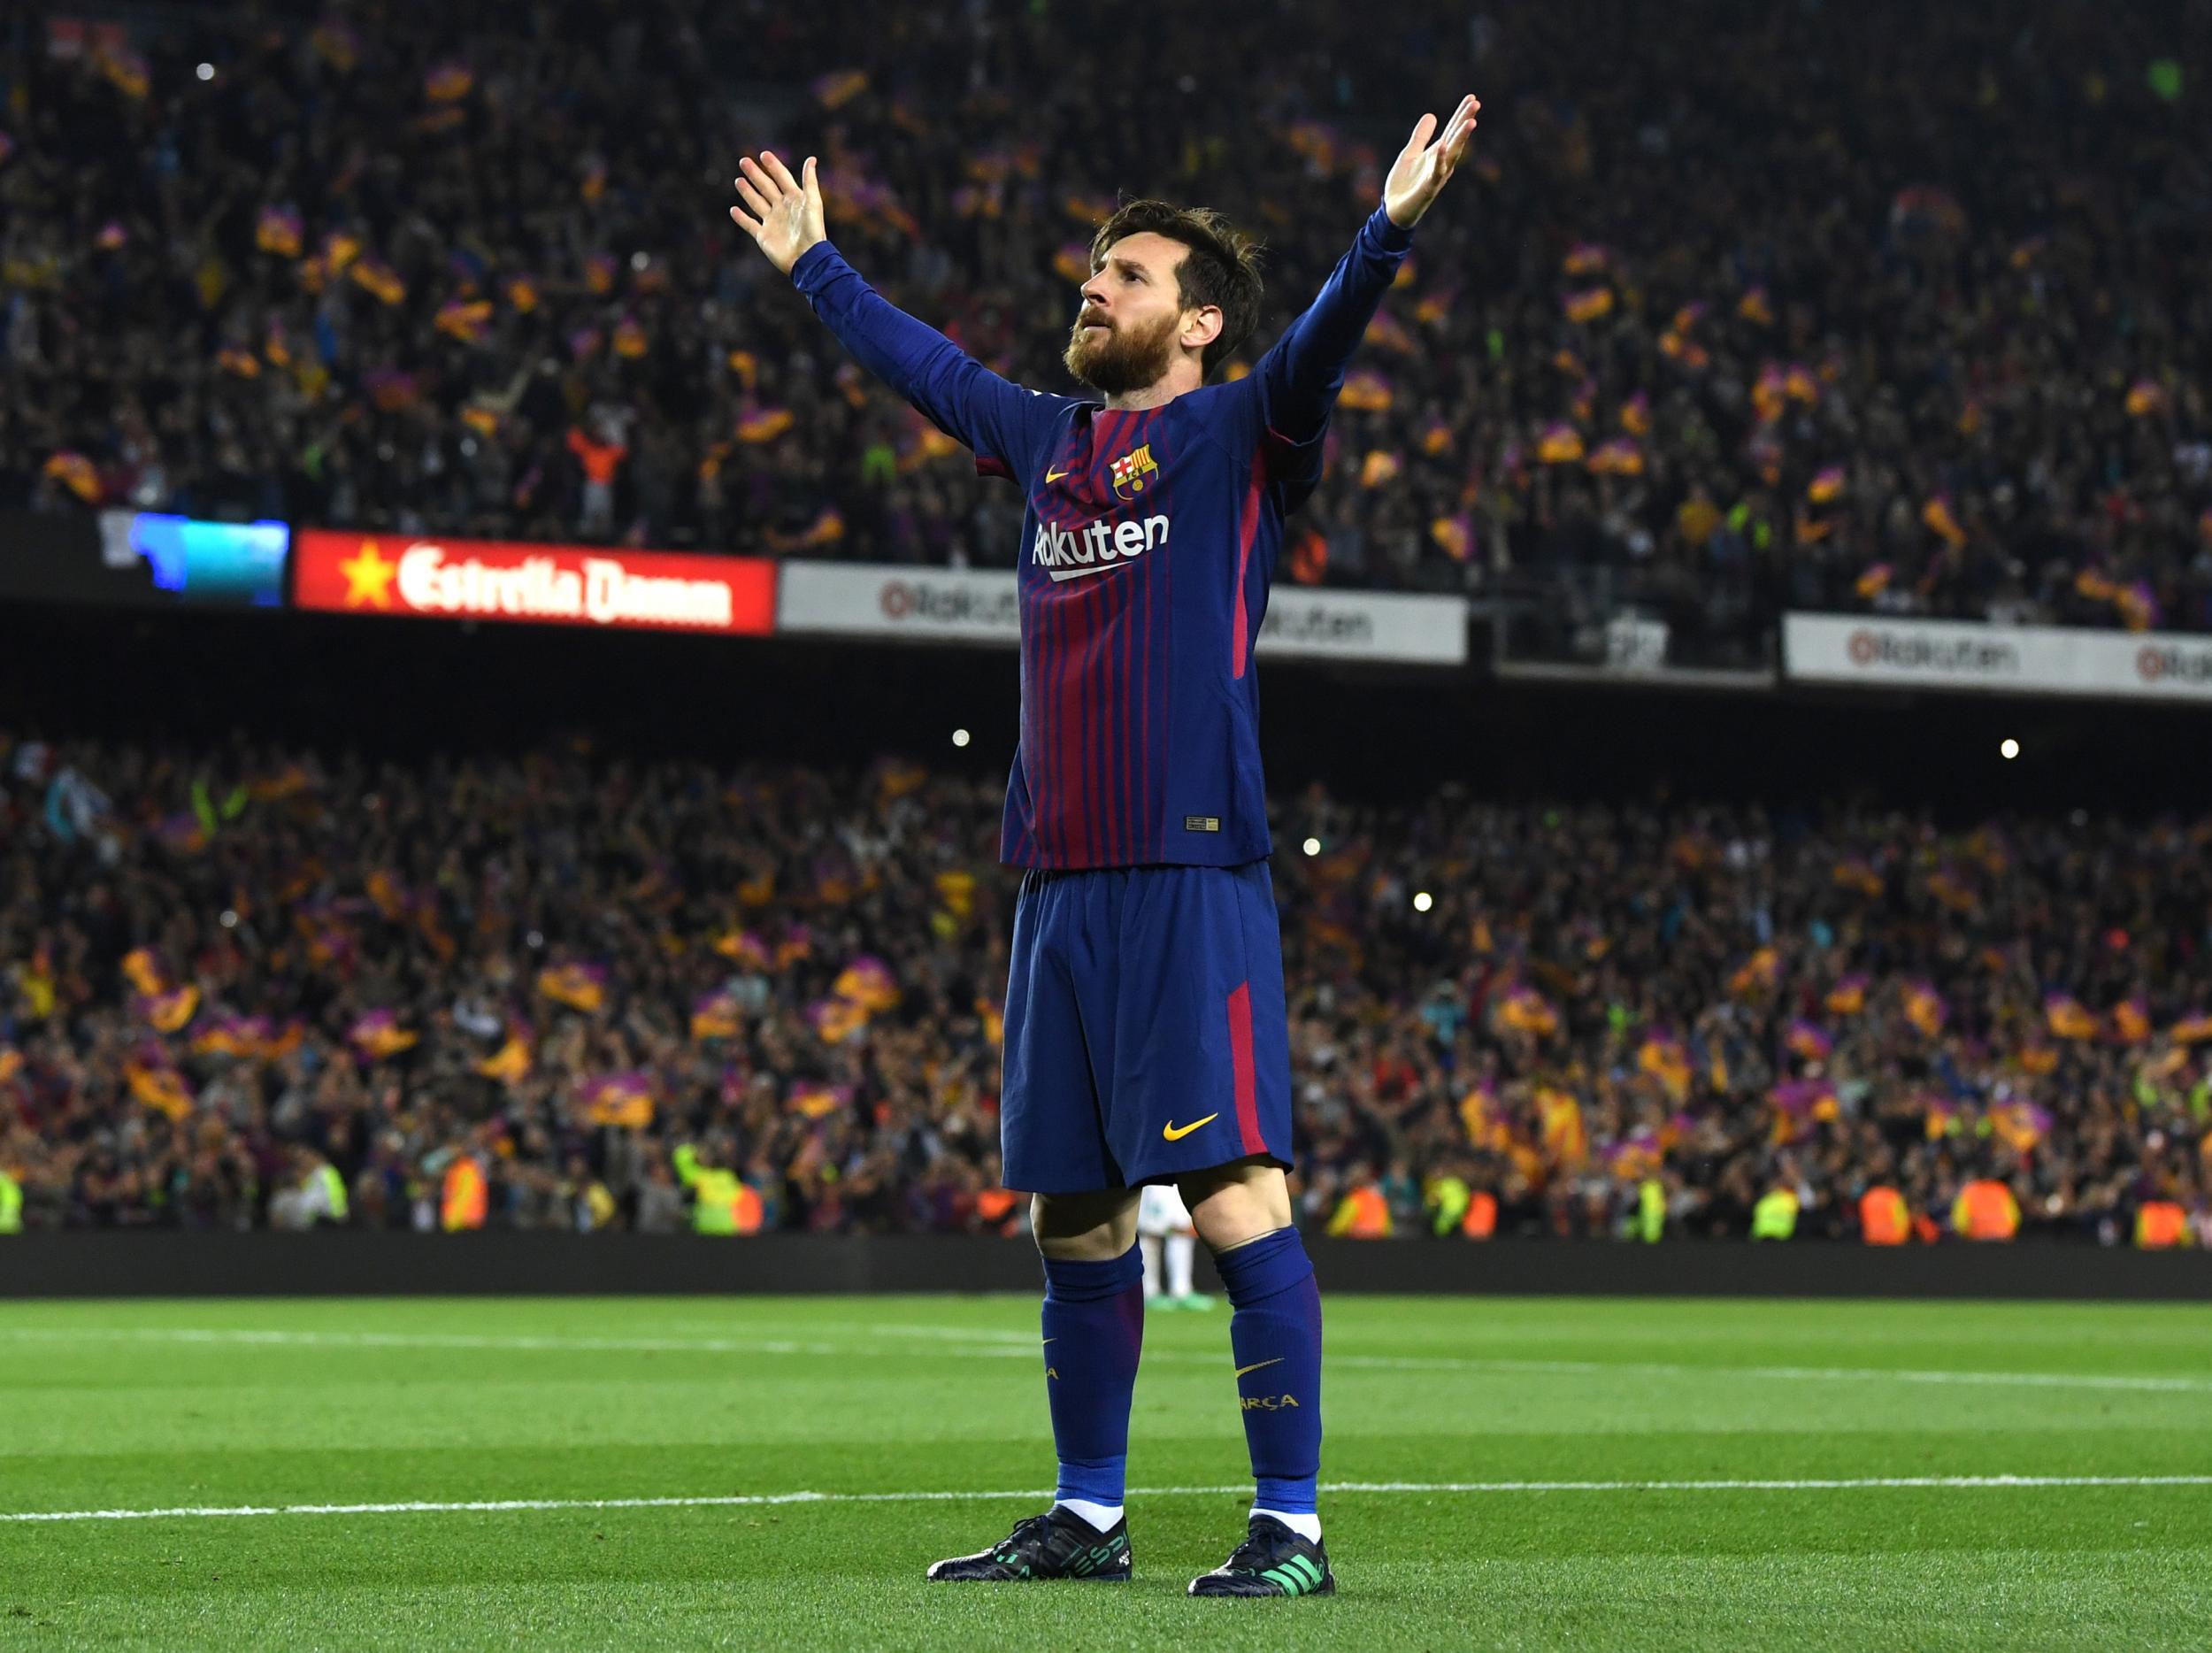 Messi has redefined what we think is possible in the game